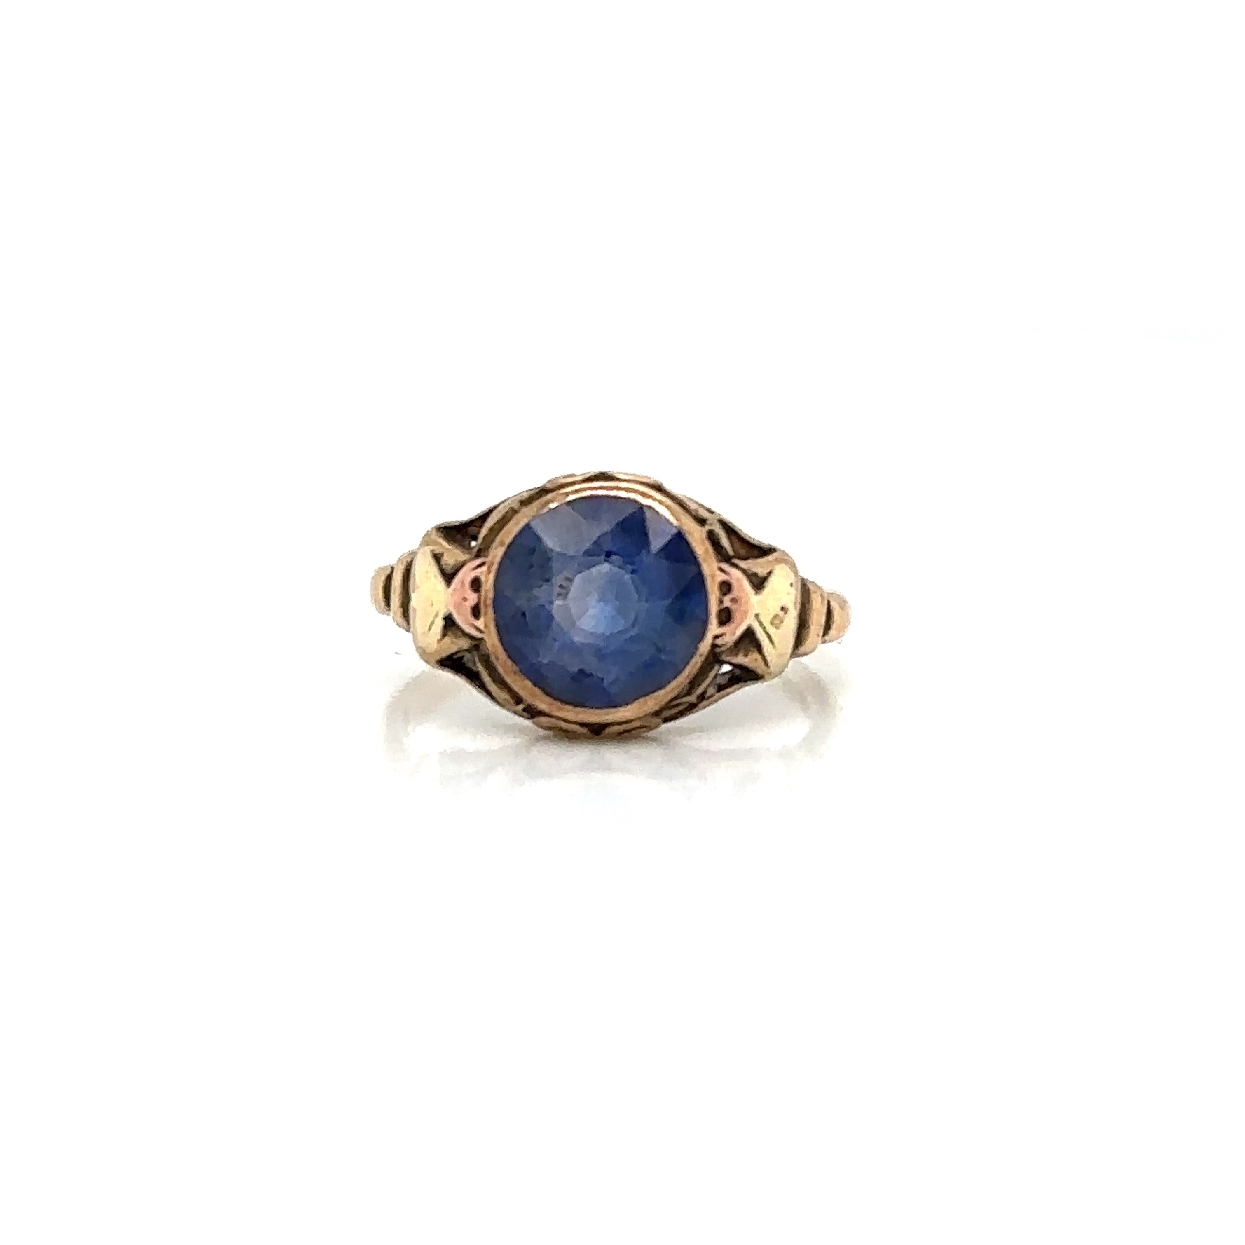 10K Yellow Gold Victorian Ring with Blue Paste Stone

Size 6